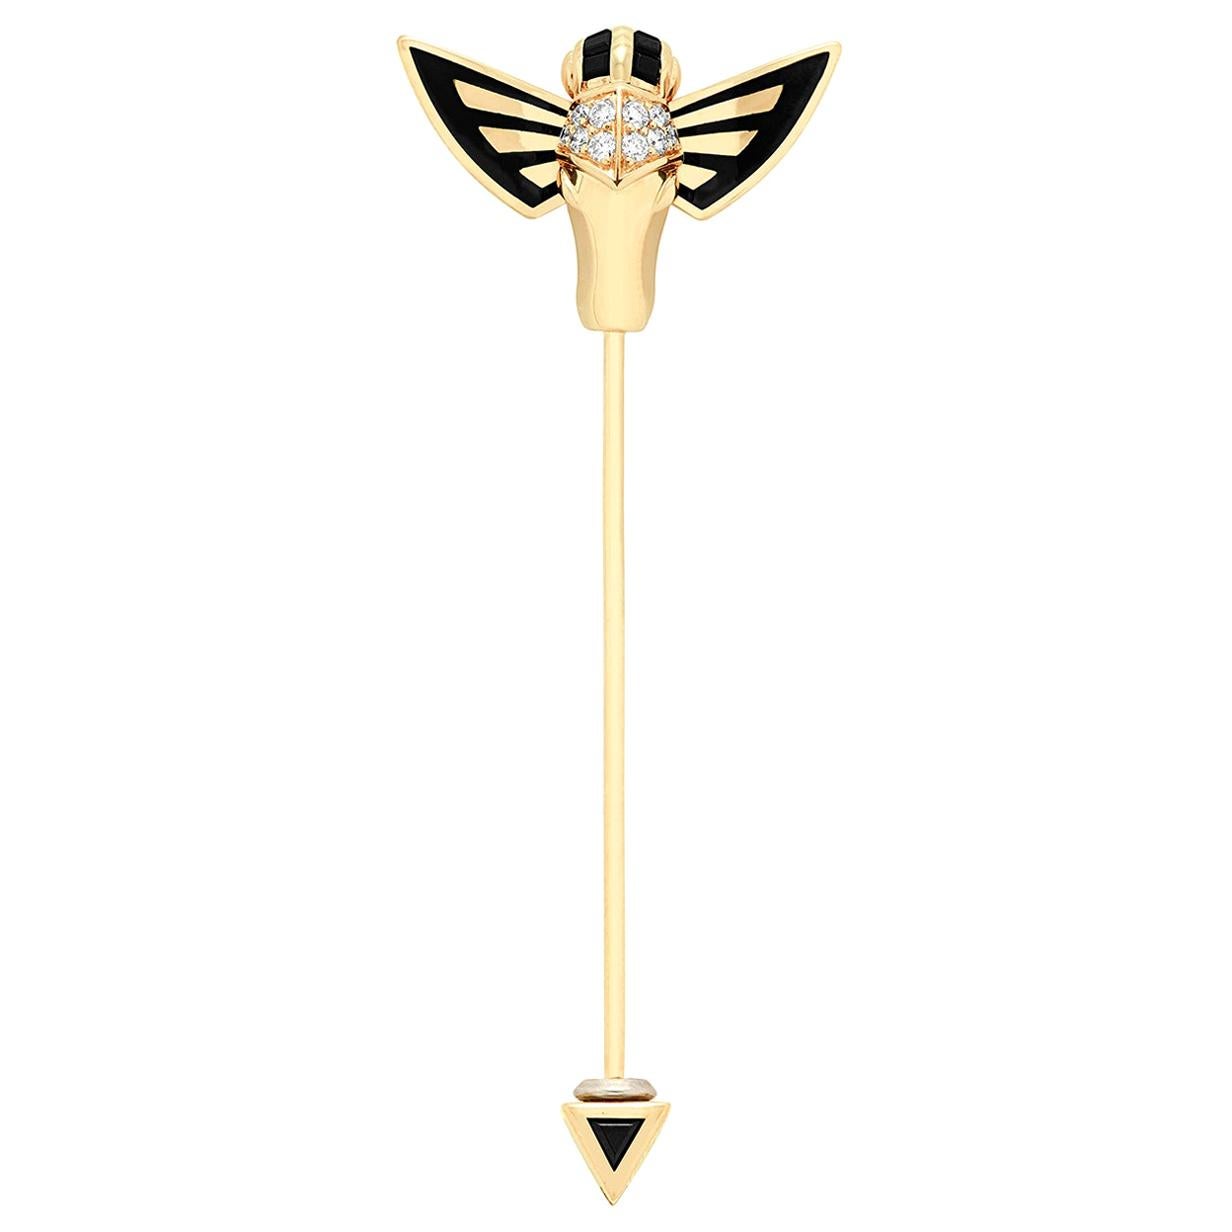 Stephen Webster Jitterbug Horse Fly 18 Carat Gold and White Diamond Lapel Pin For Sale